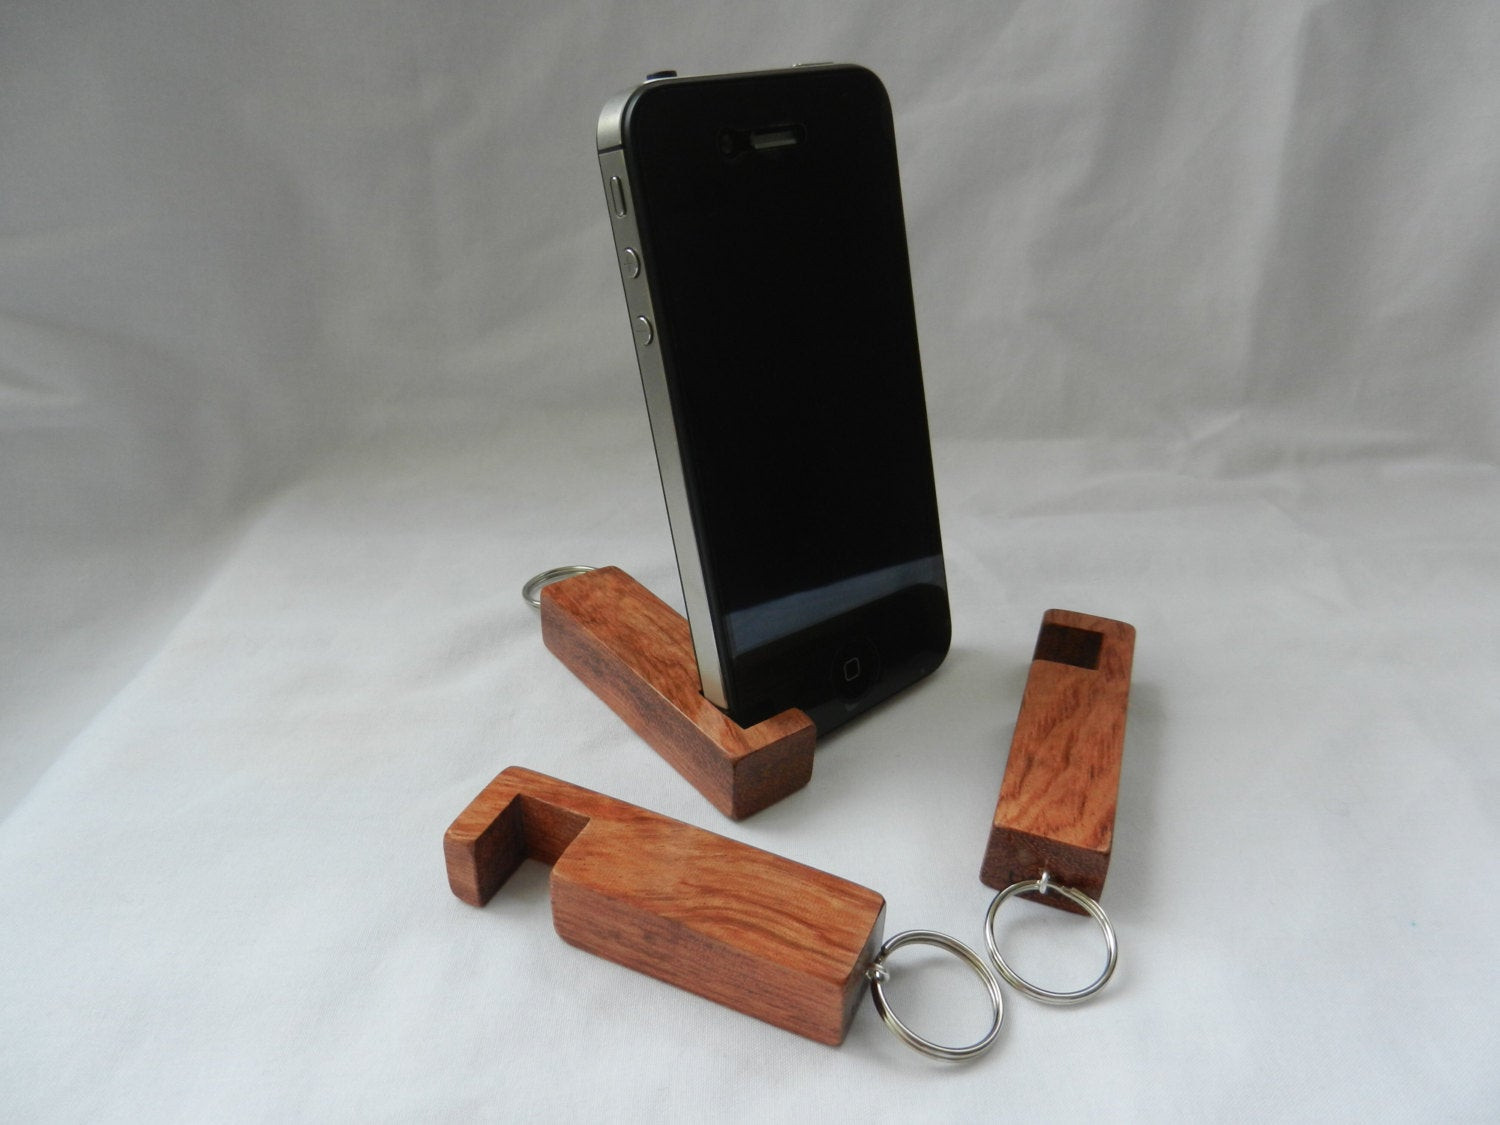 DIY Wood Cell Phone Stand
 pact Phone Stand inotch1 in Bubinga wooden phone stand